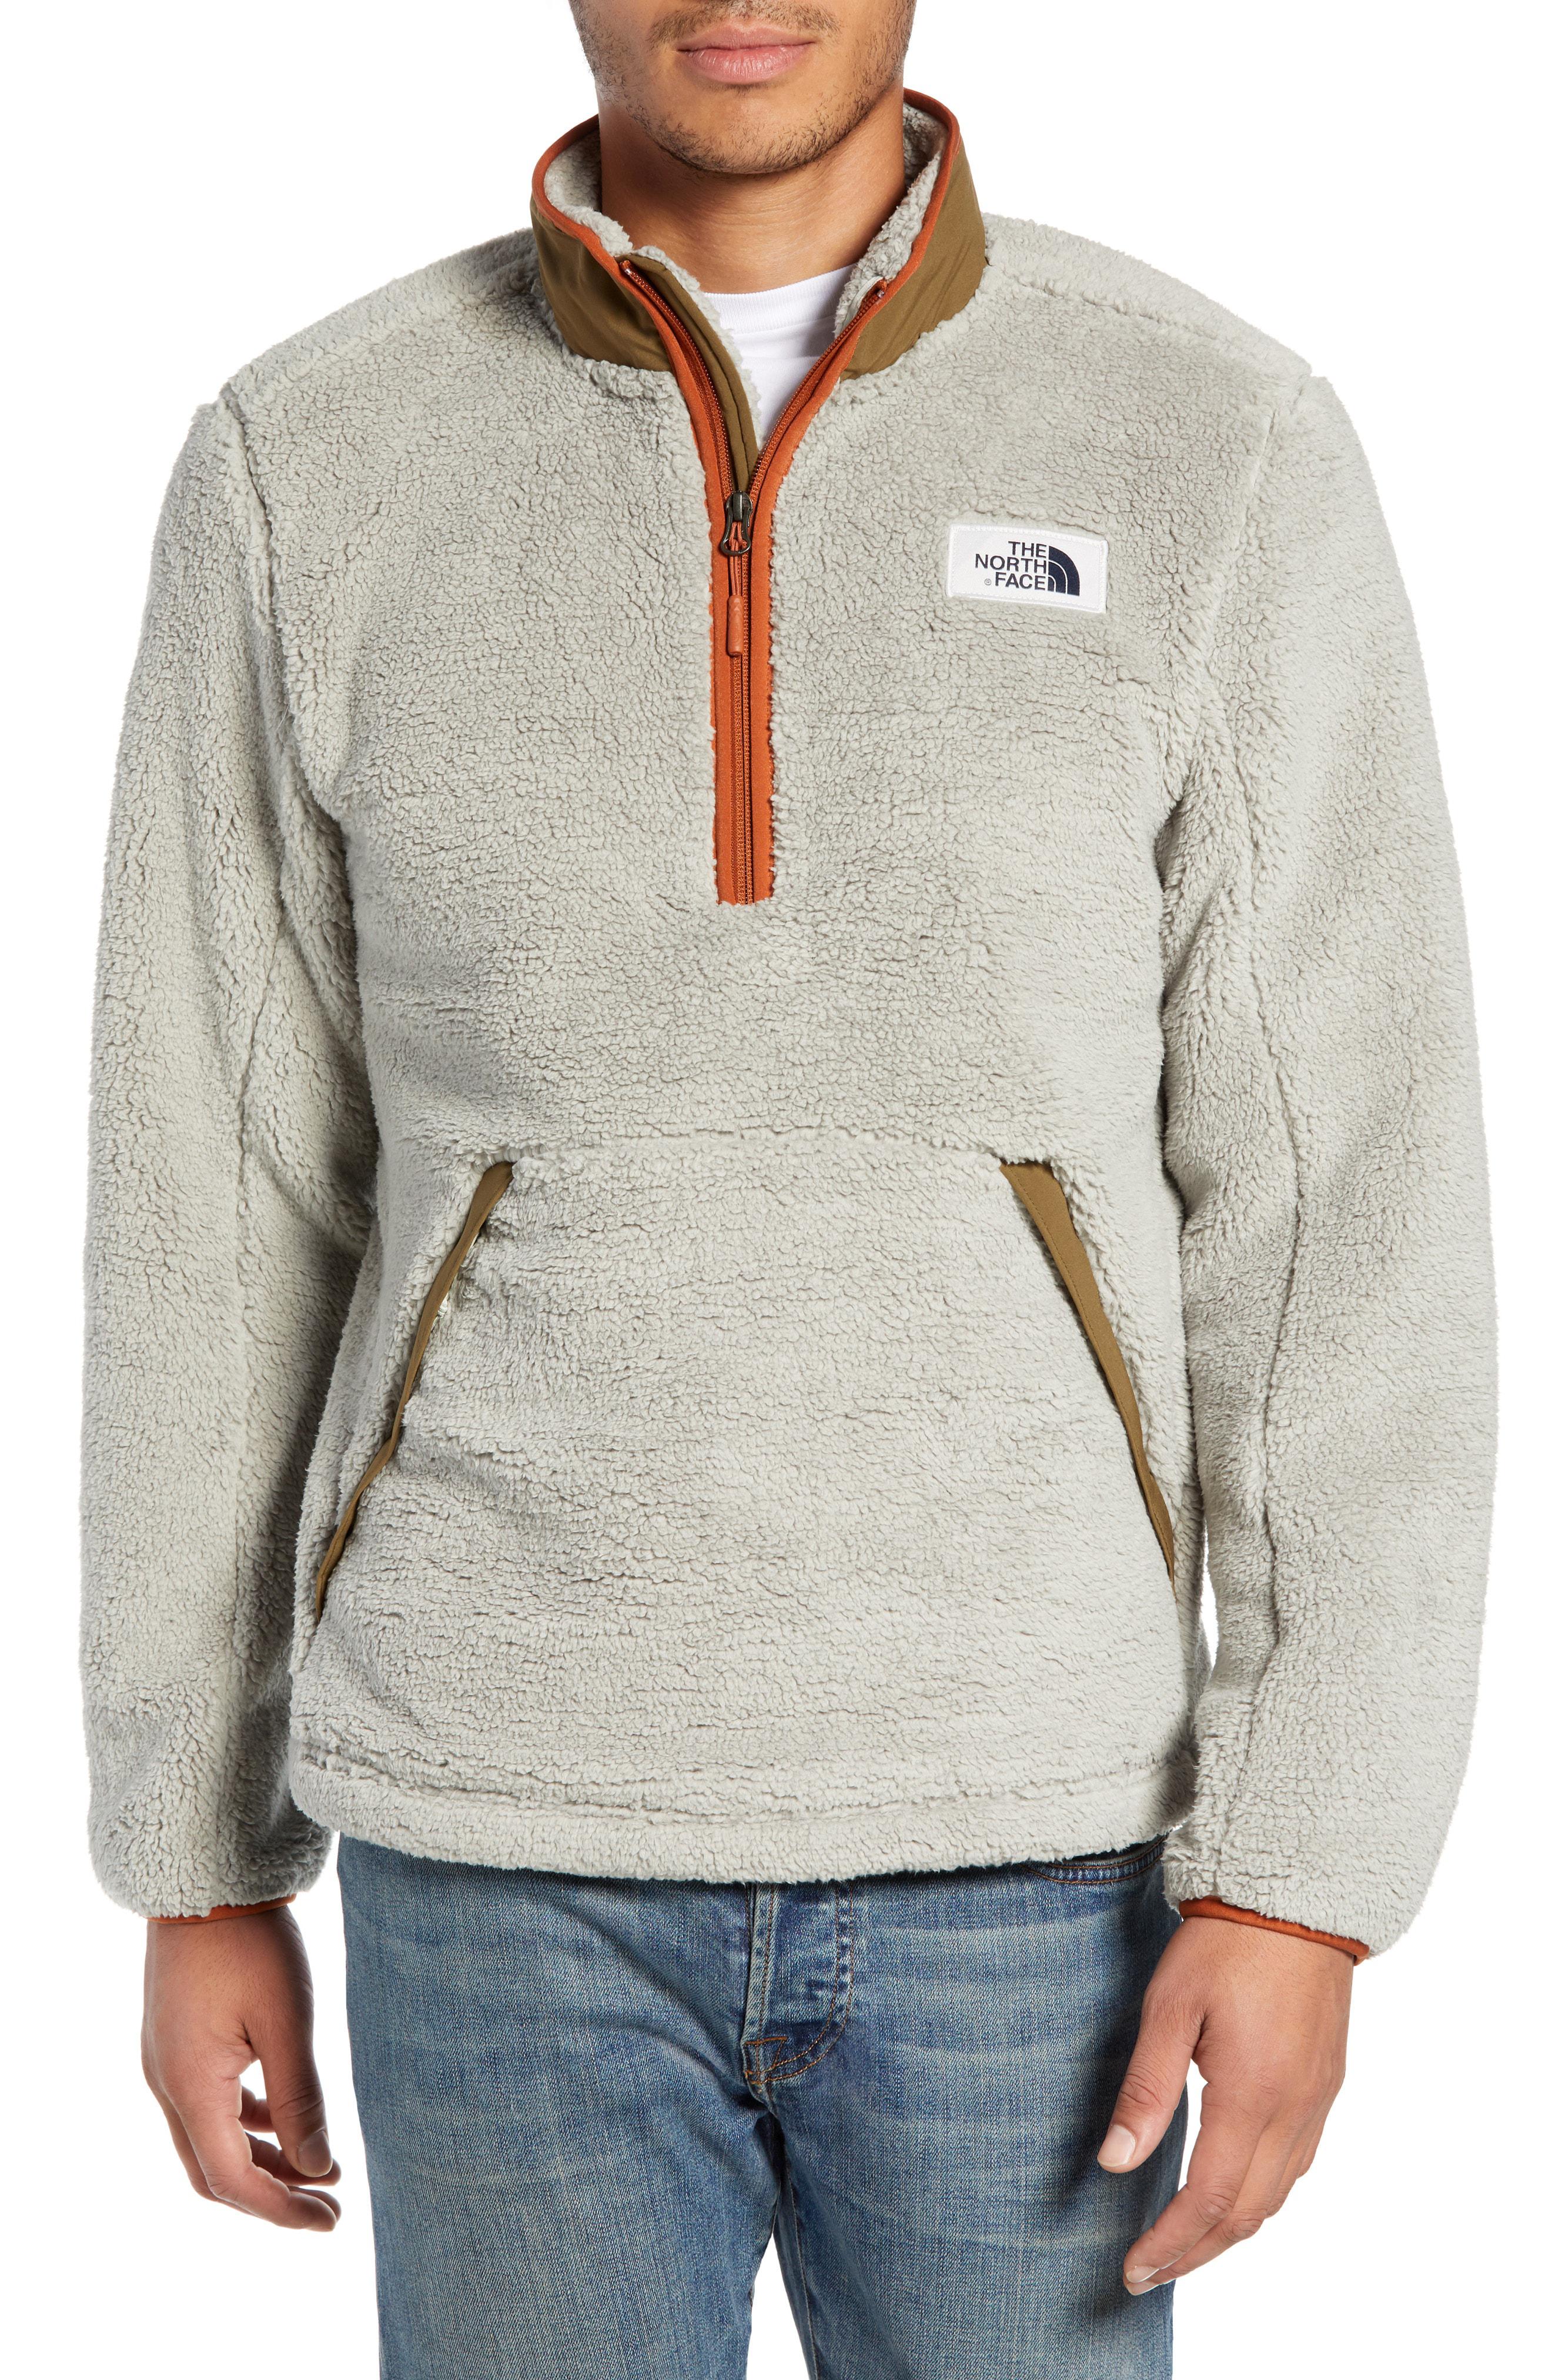 The North Face Campshire Pullover Fleece Jacket in Natural for Men - Lyst